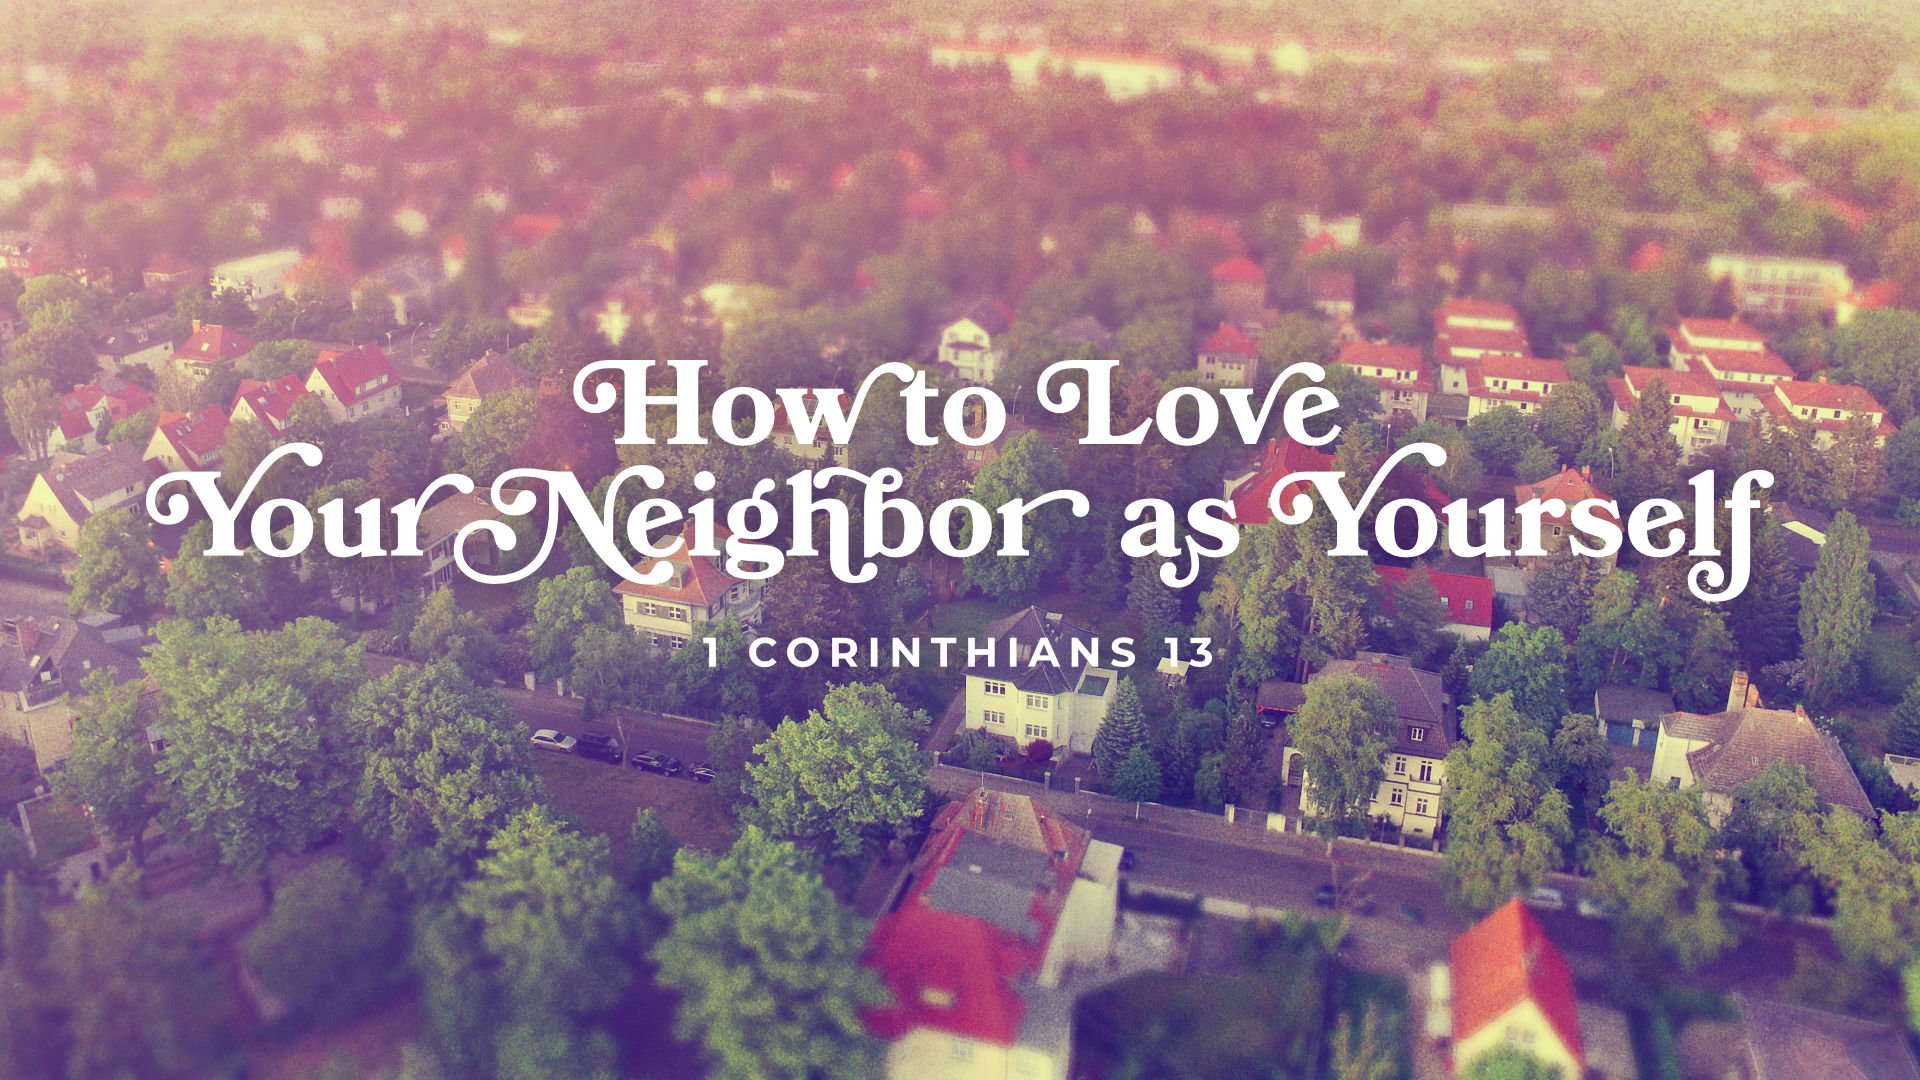 How to Love Your Neighbor as Yourself • Jan. 1 - Mar. 5, 2023